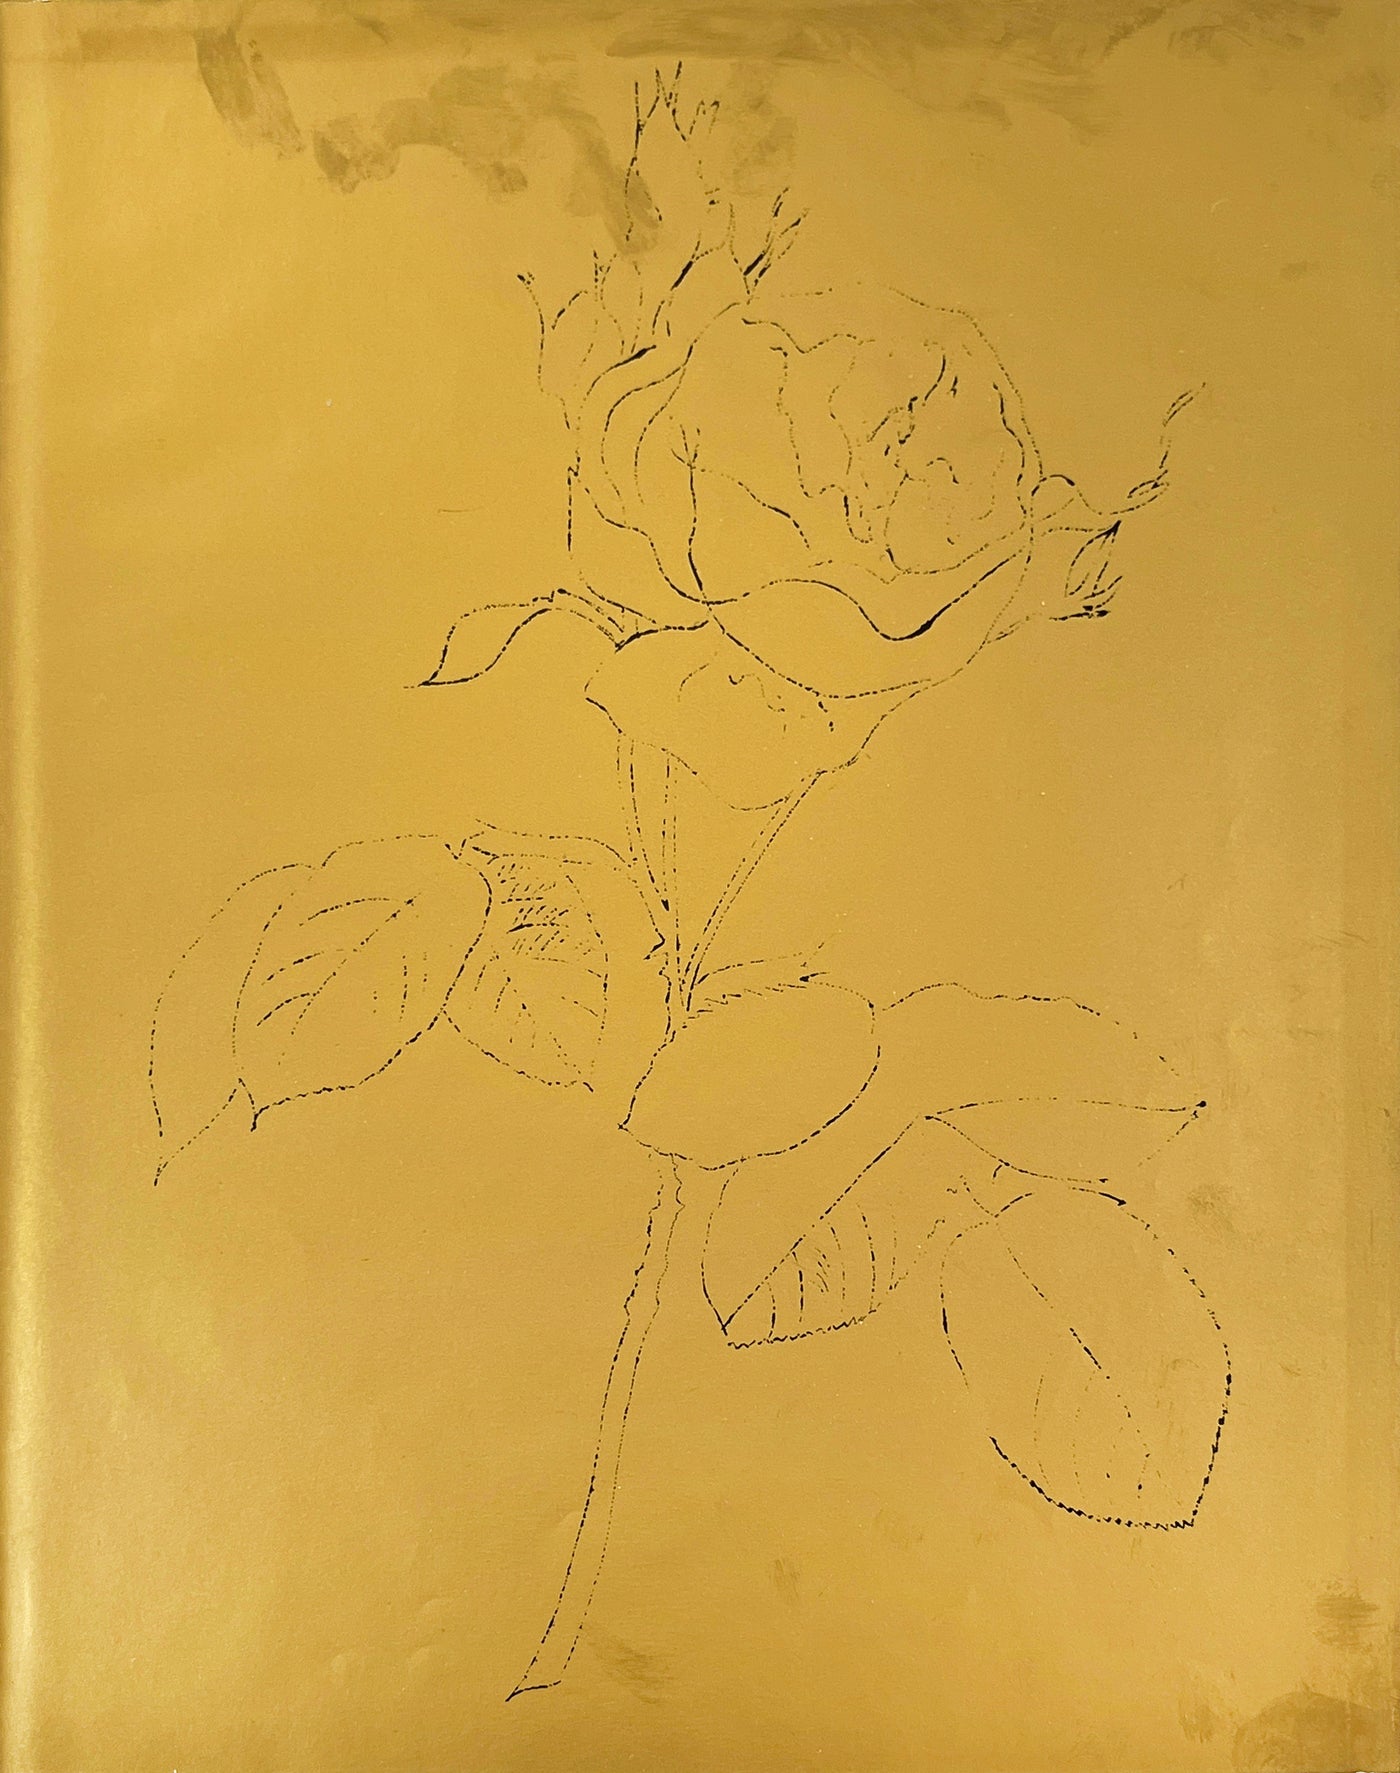 Andy Warhol, 'A Gold Book IV.122', 1957 | Print for Sale